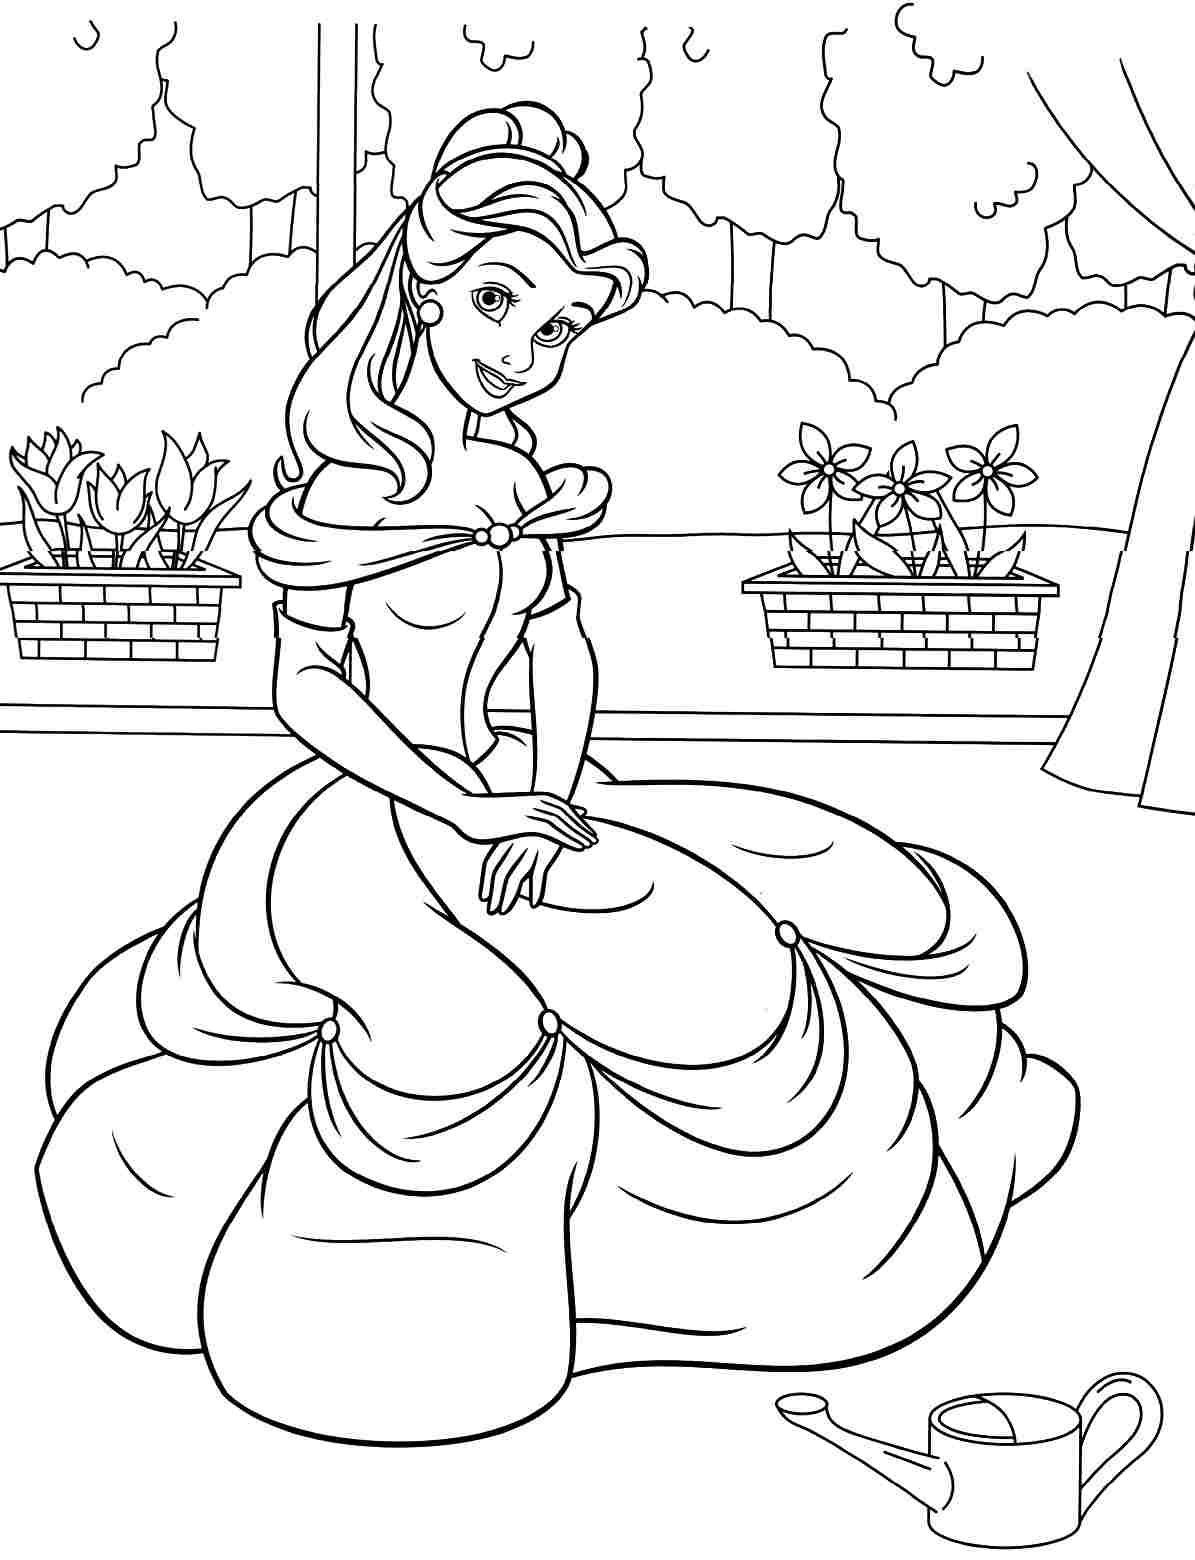 Disney Coloring Pages For Girls
 Disney Princess Belle Coloring Pages For Girls